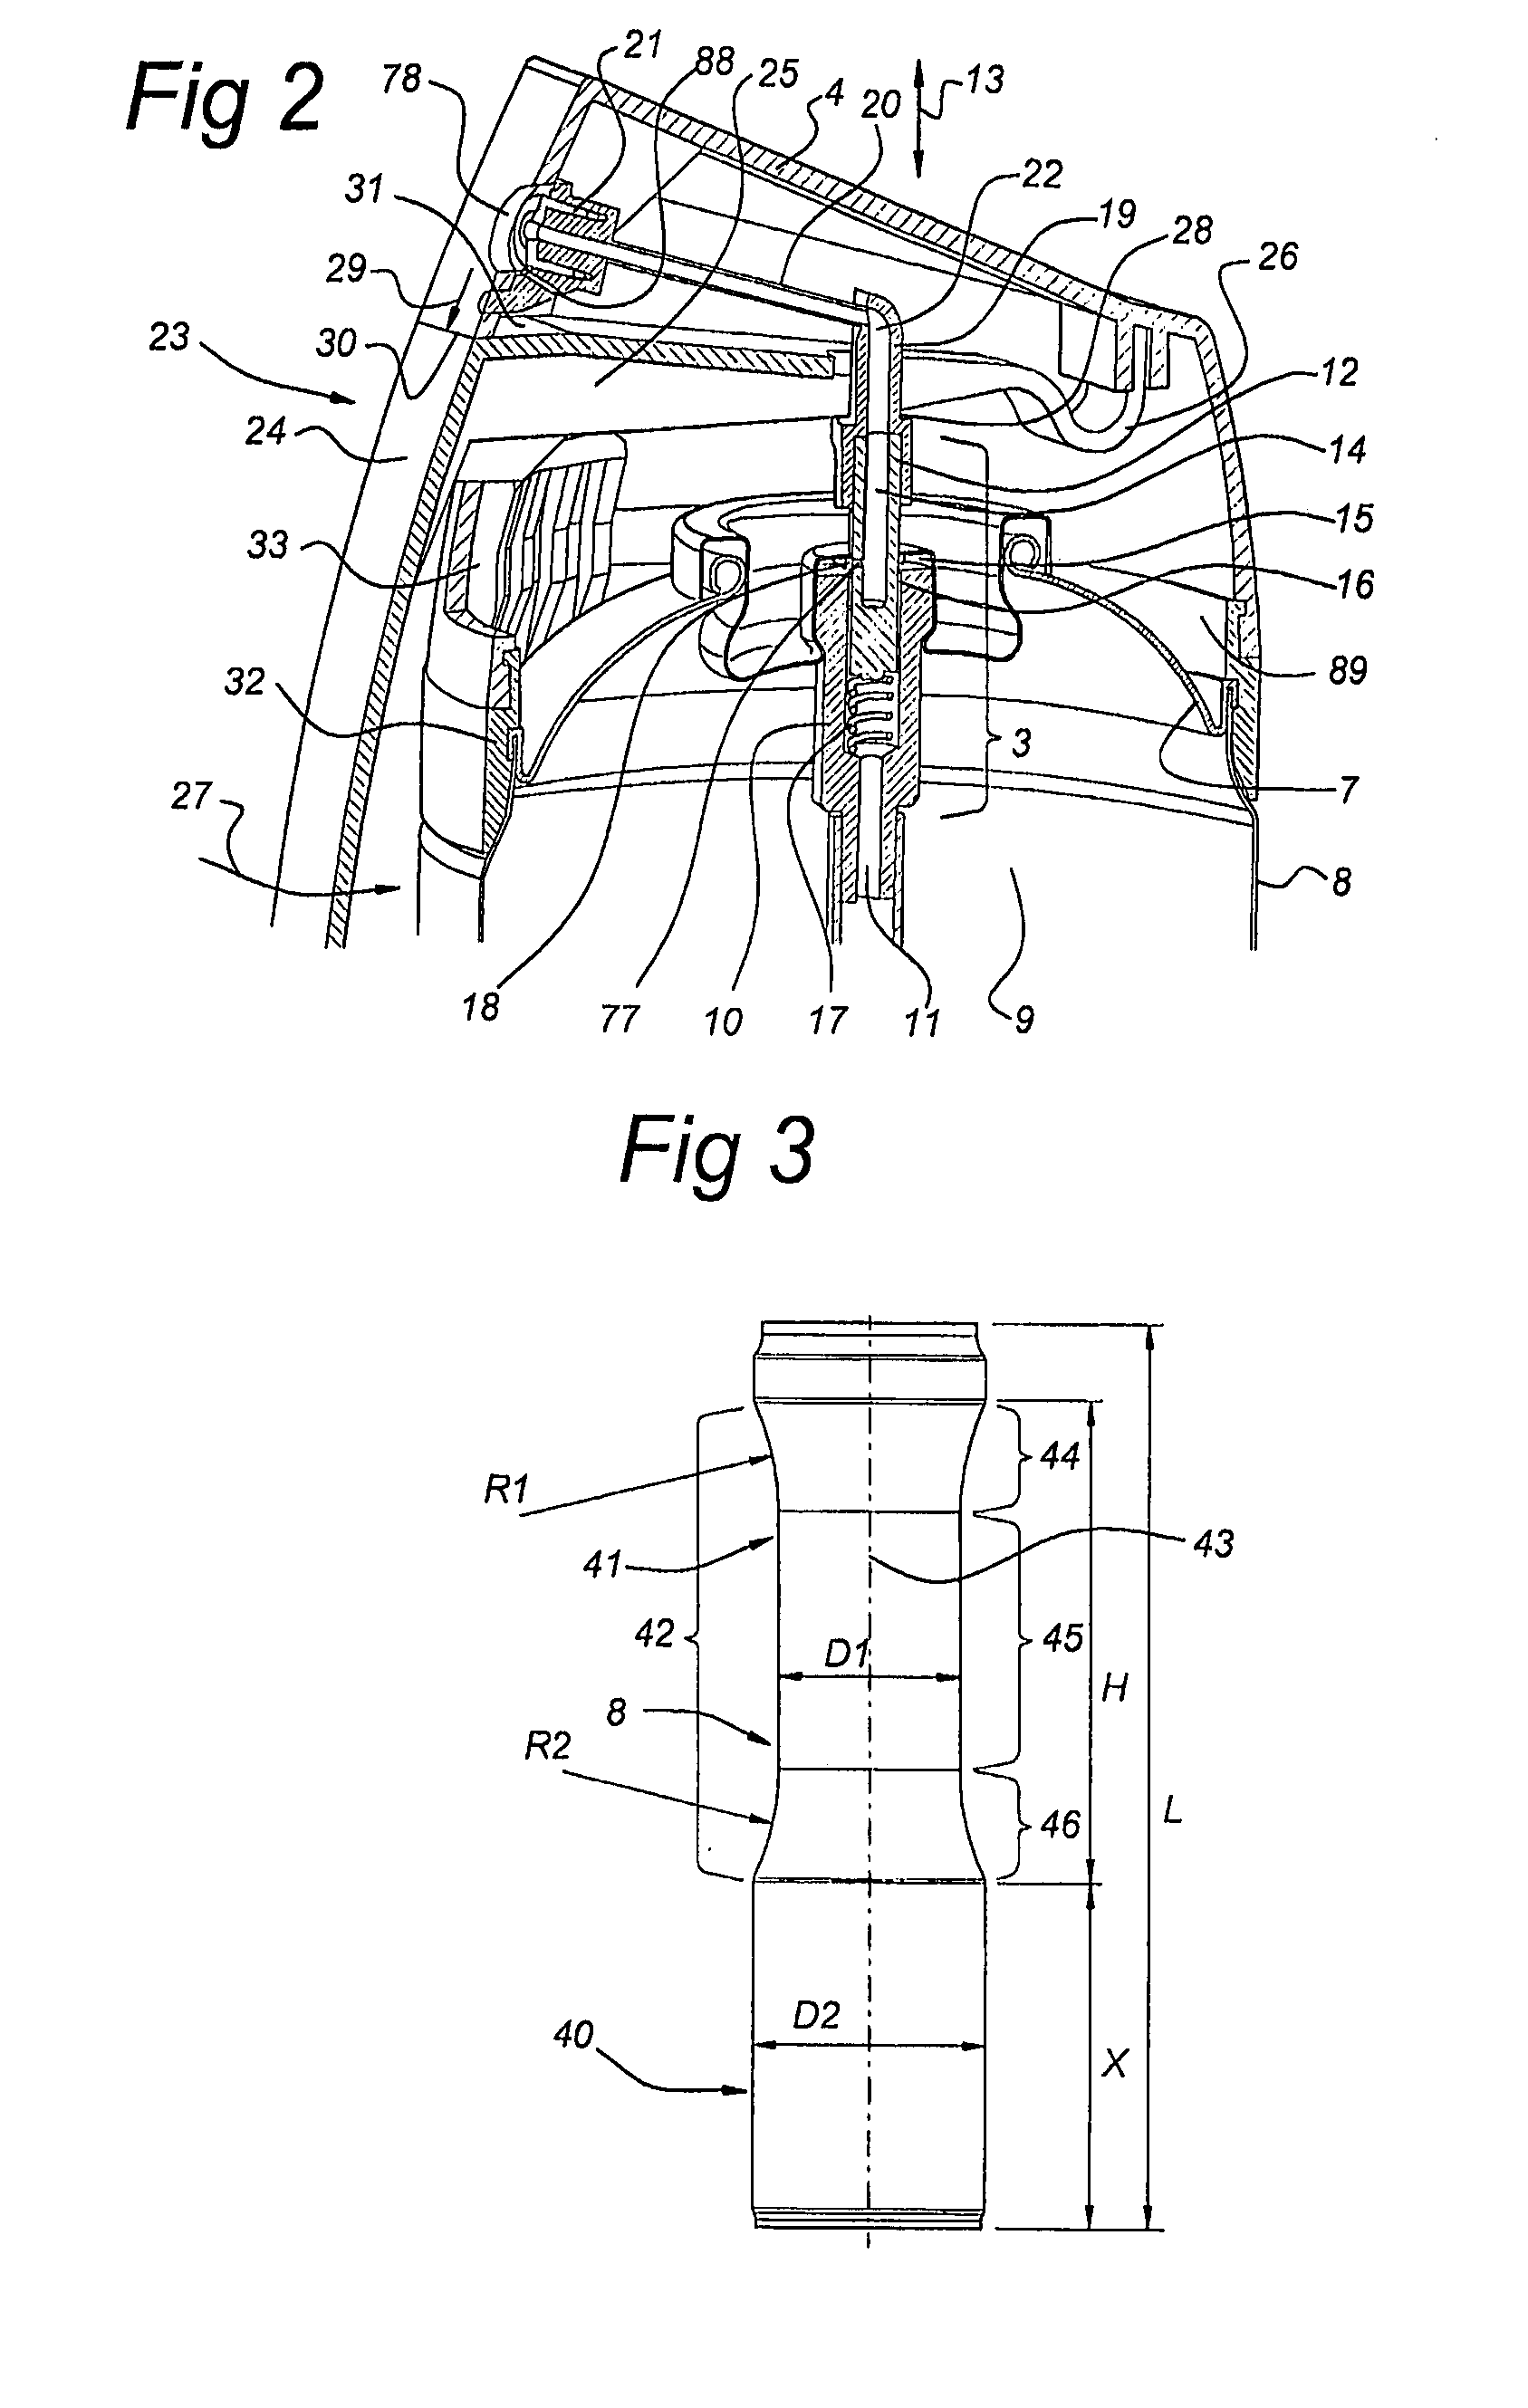 Dispensing Device for Dispensing a Product